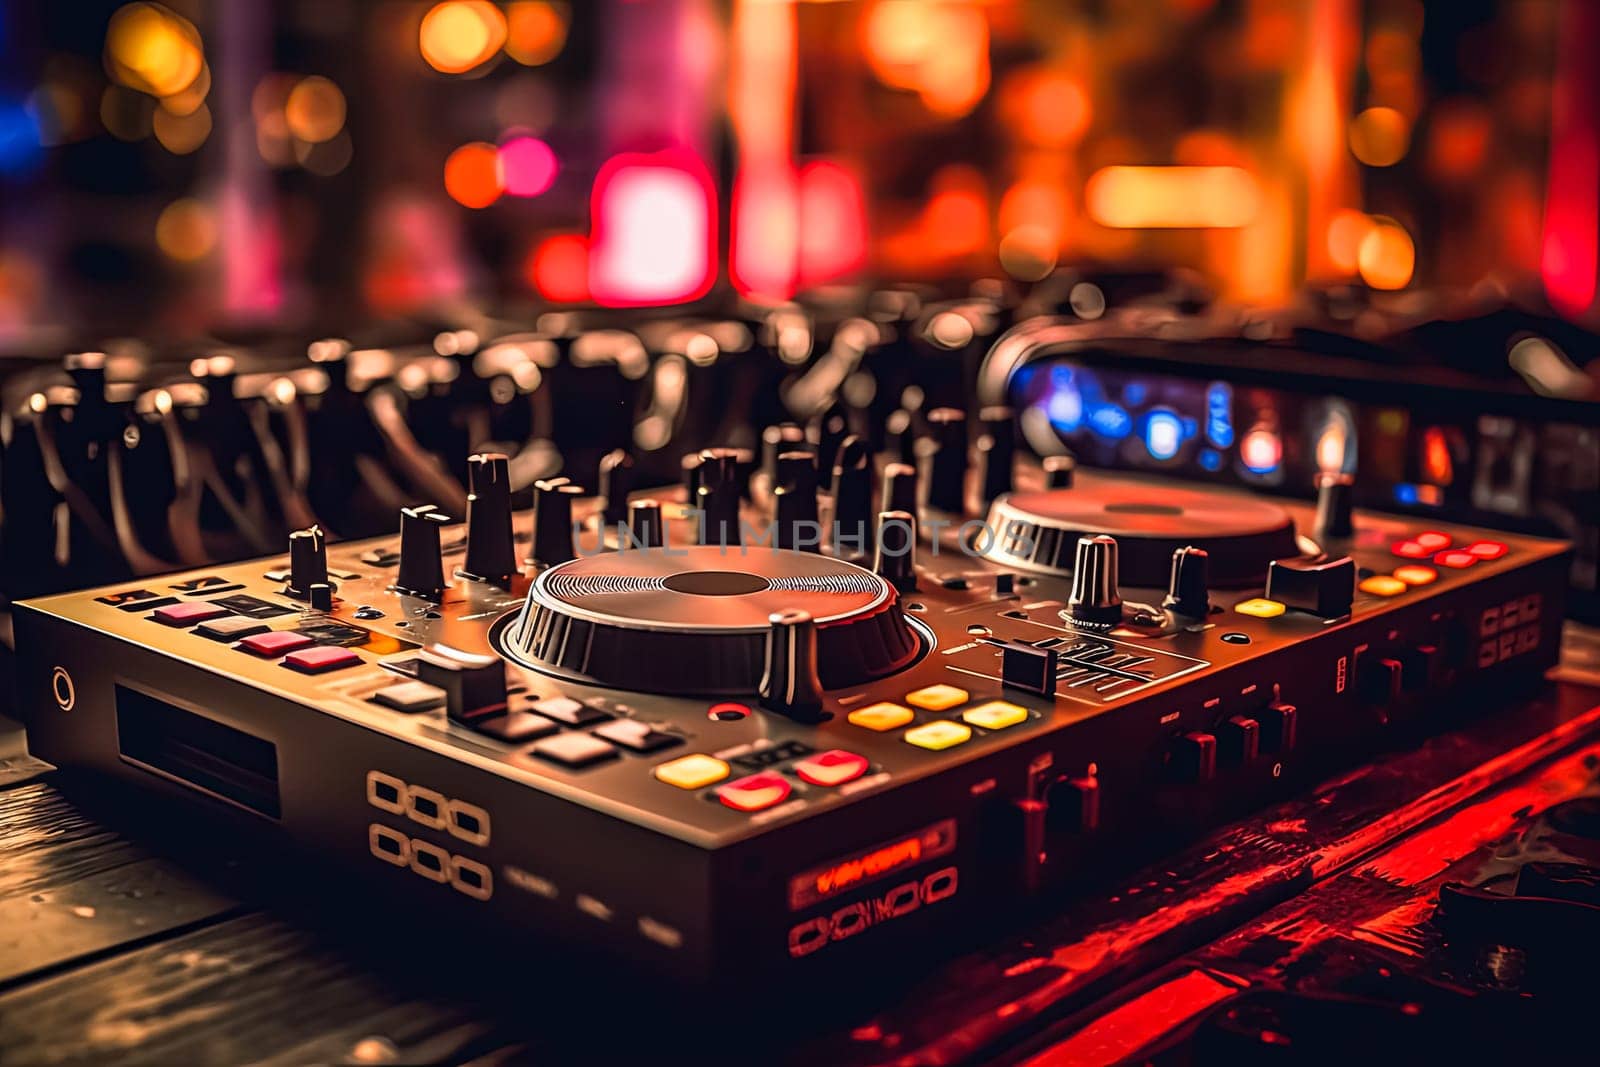 A set of DJ equipment stands against a vibrant orange backdrop, radiating energy and setting the stage for an electrifying performance.